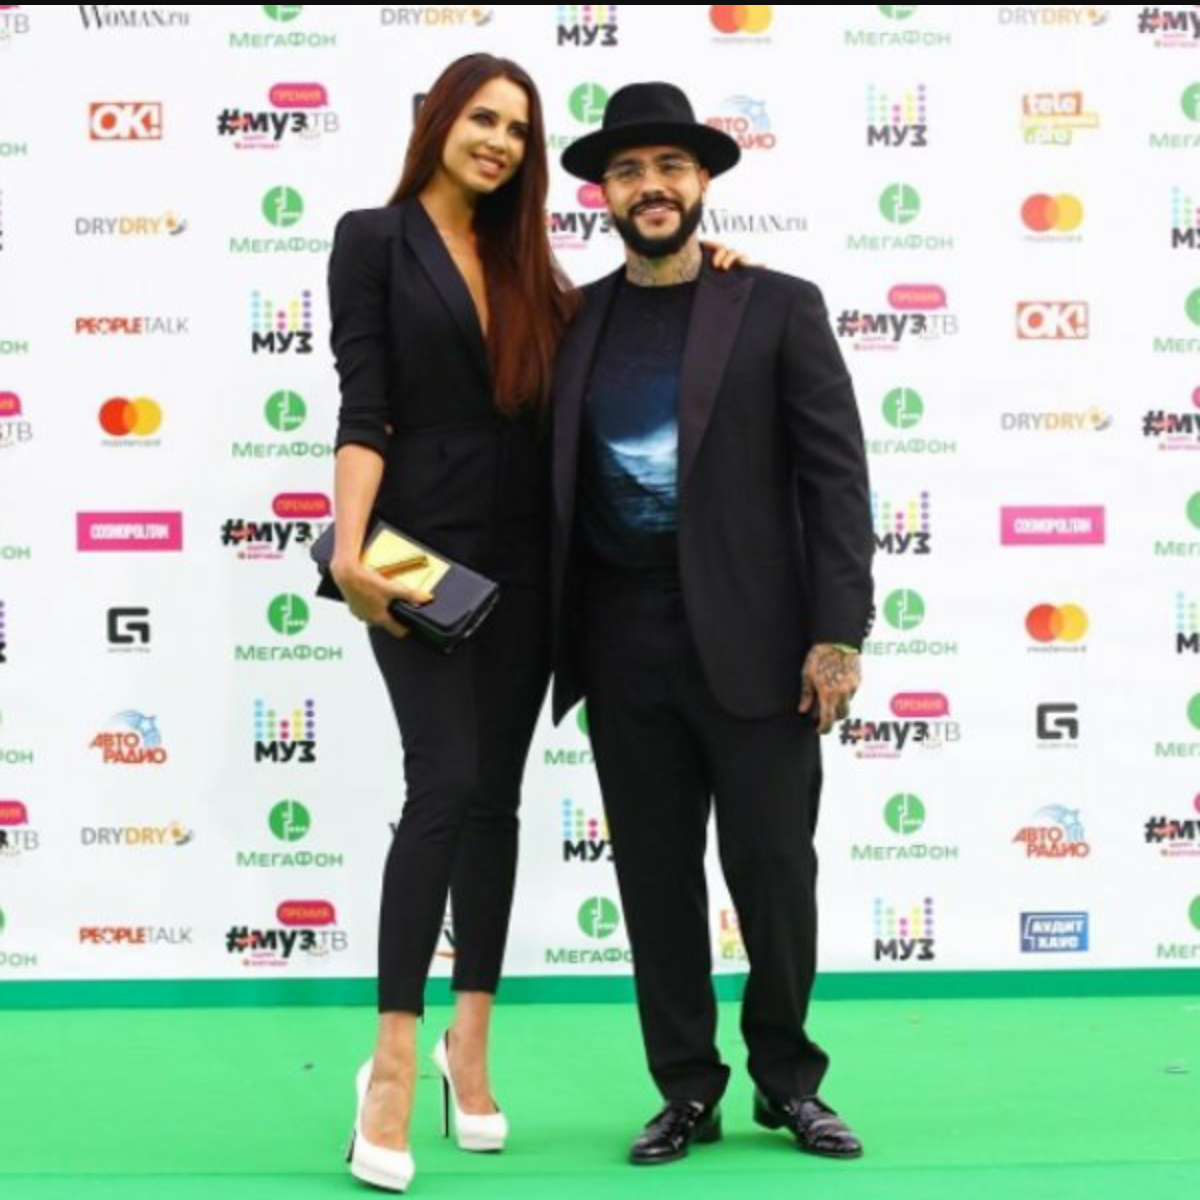 It looks like Leps did bite Timati while the clips were filmed - music tv award, Timati, Russian rap